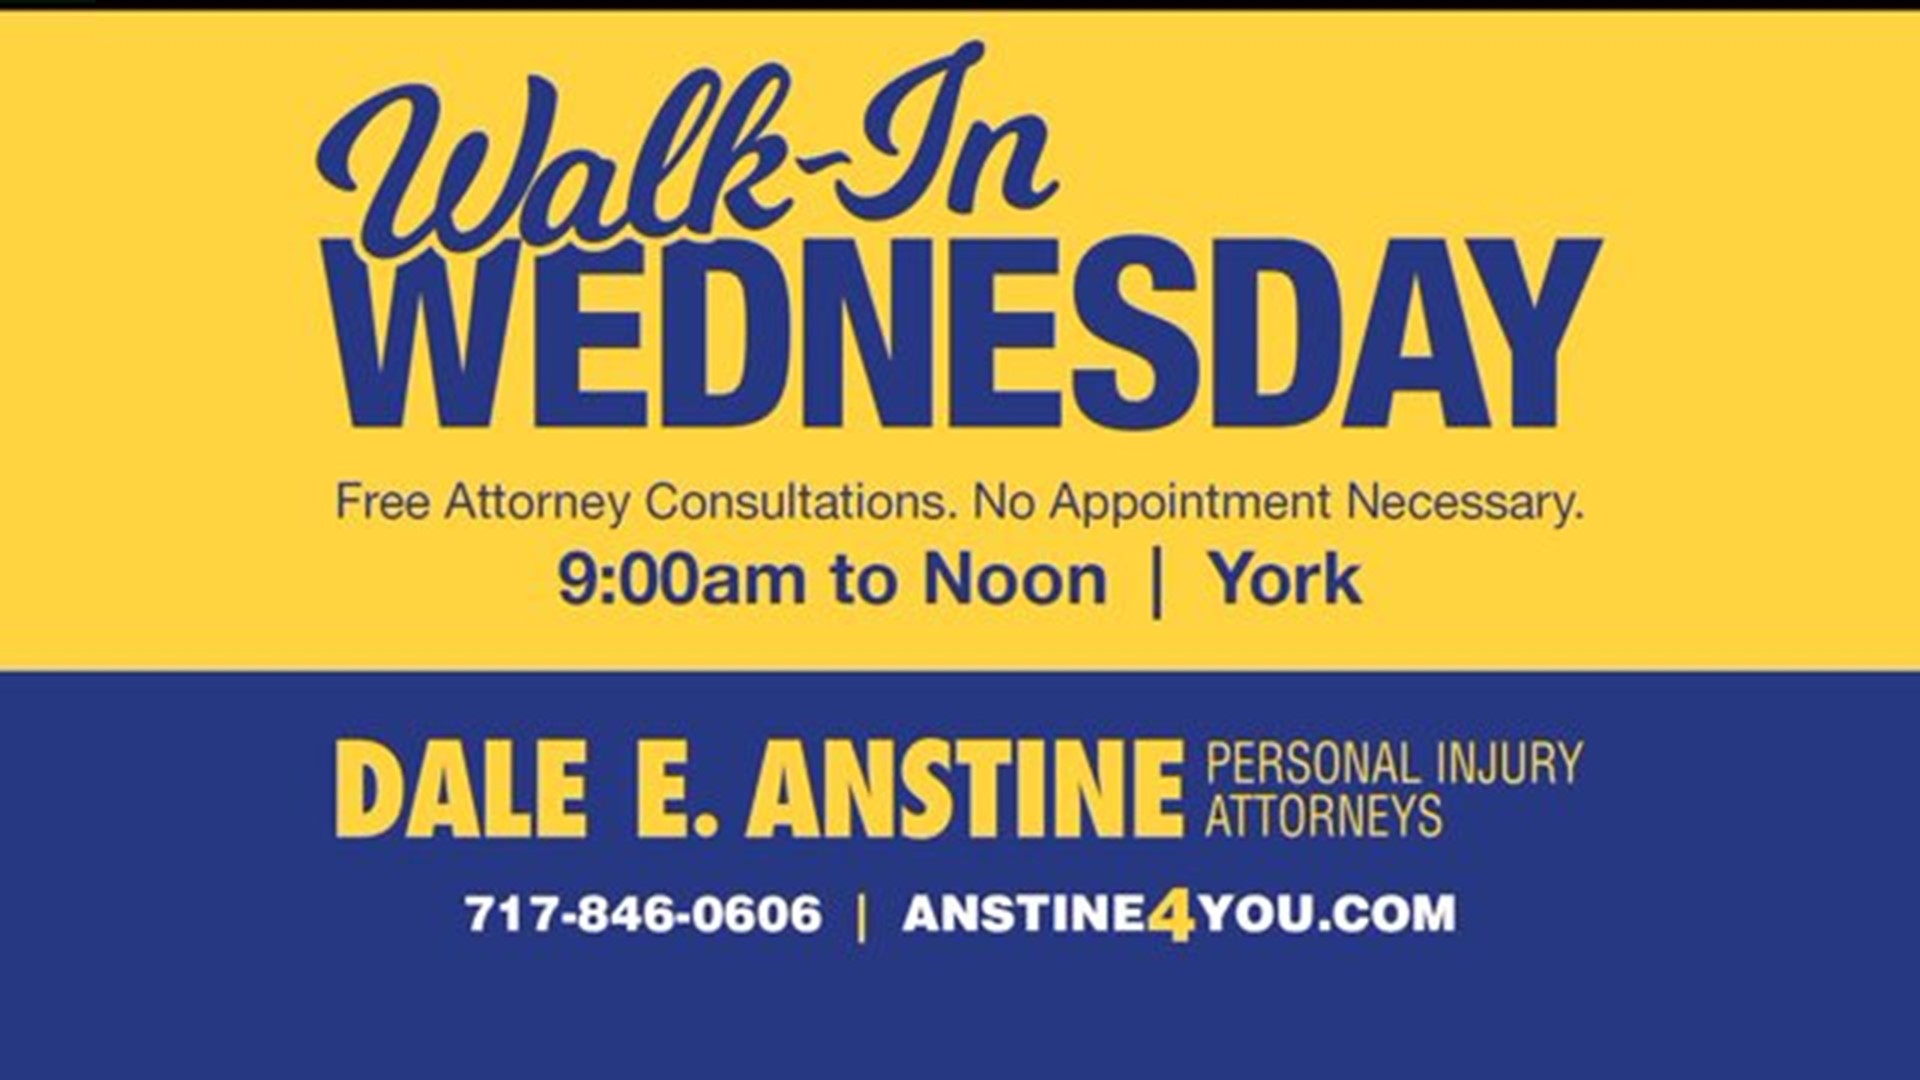 Dale E. Anstine offers free legal advice on `Walk-In Wednesdays`